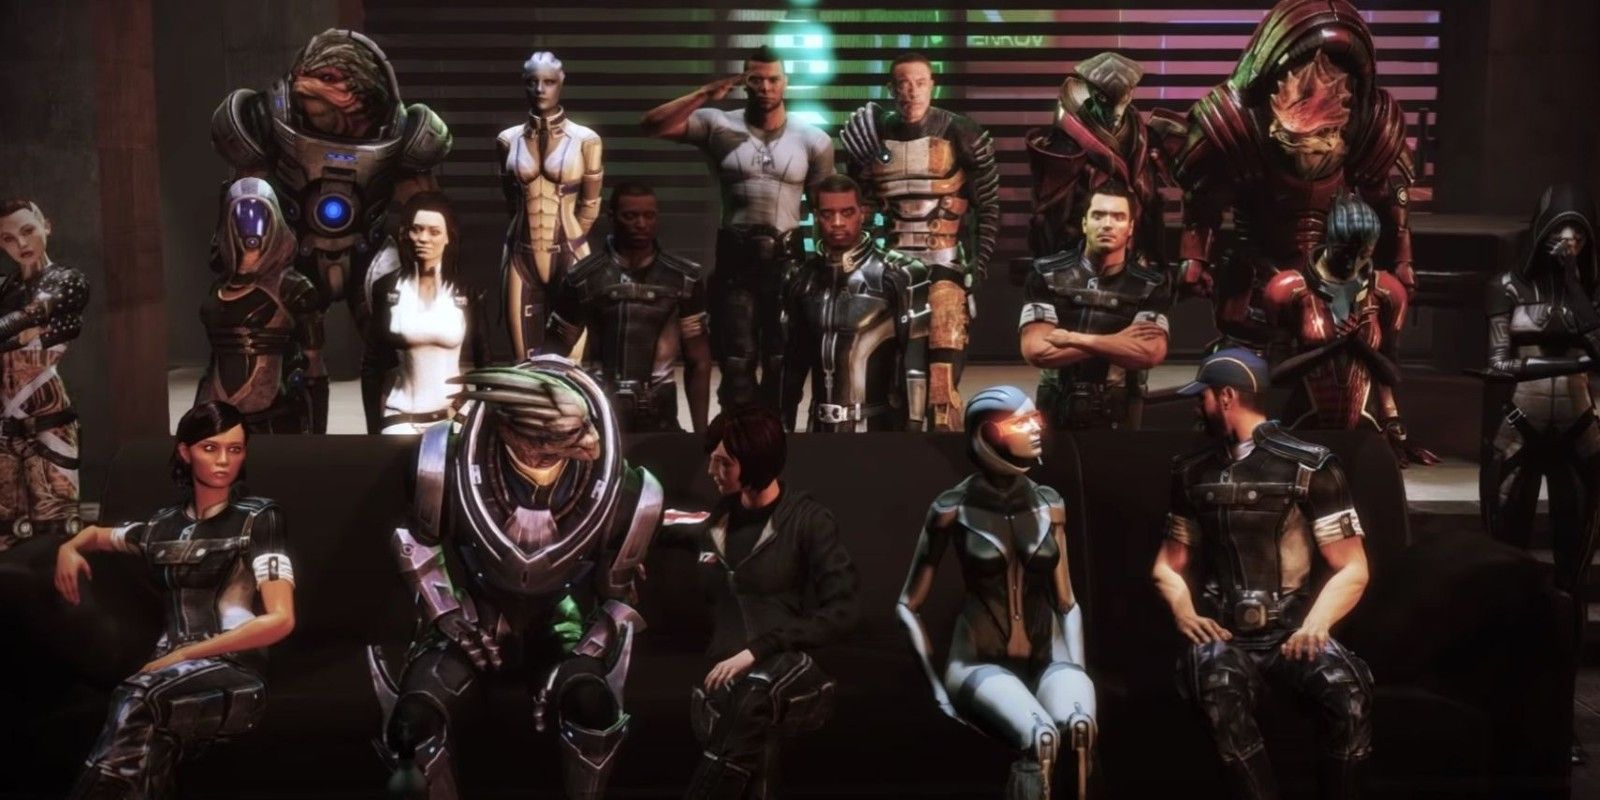 The squad takes a group photo during the party in the Citadel DLC for Mass Effect 3